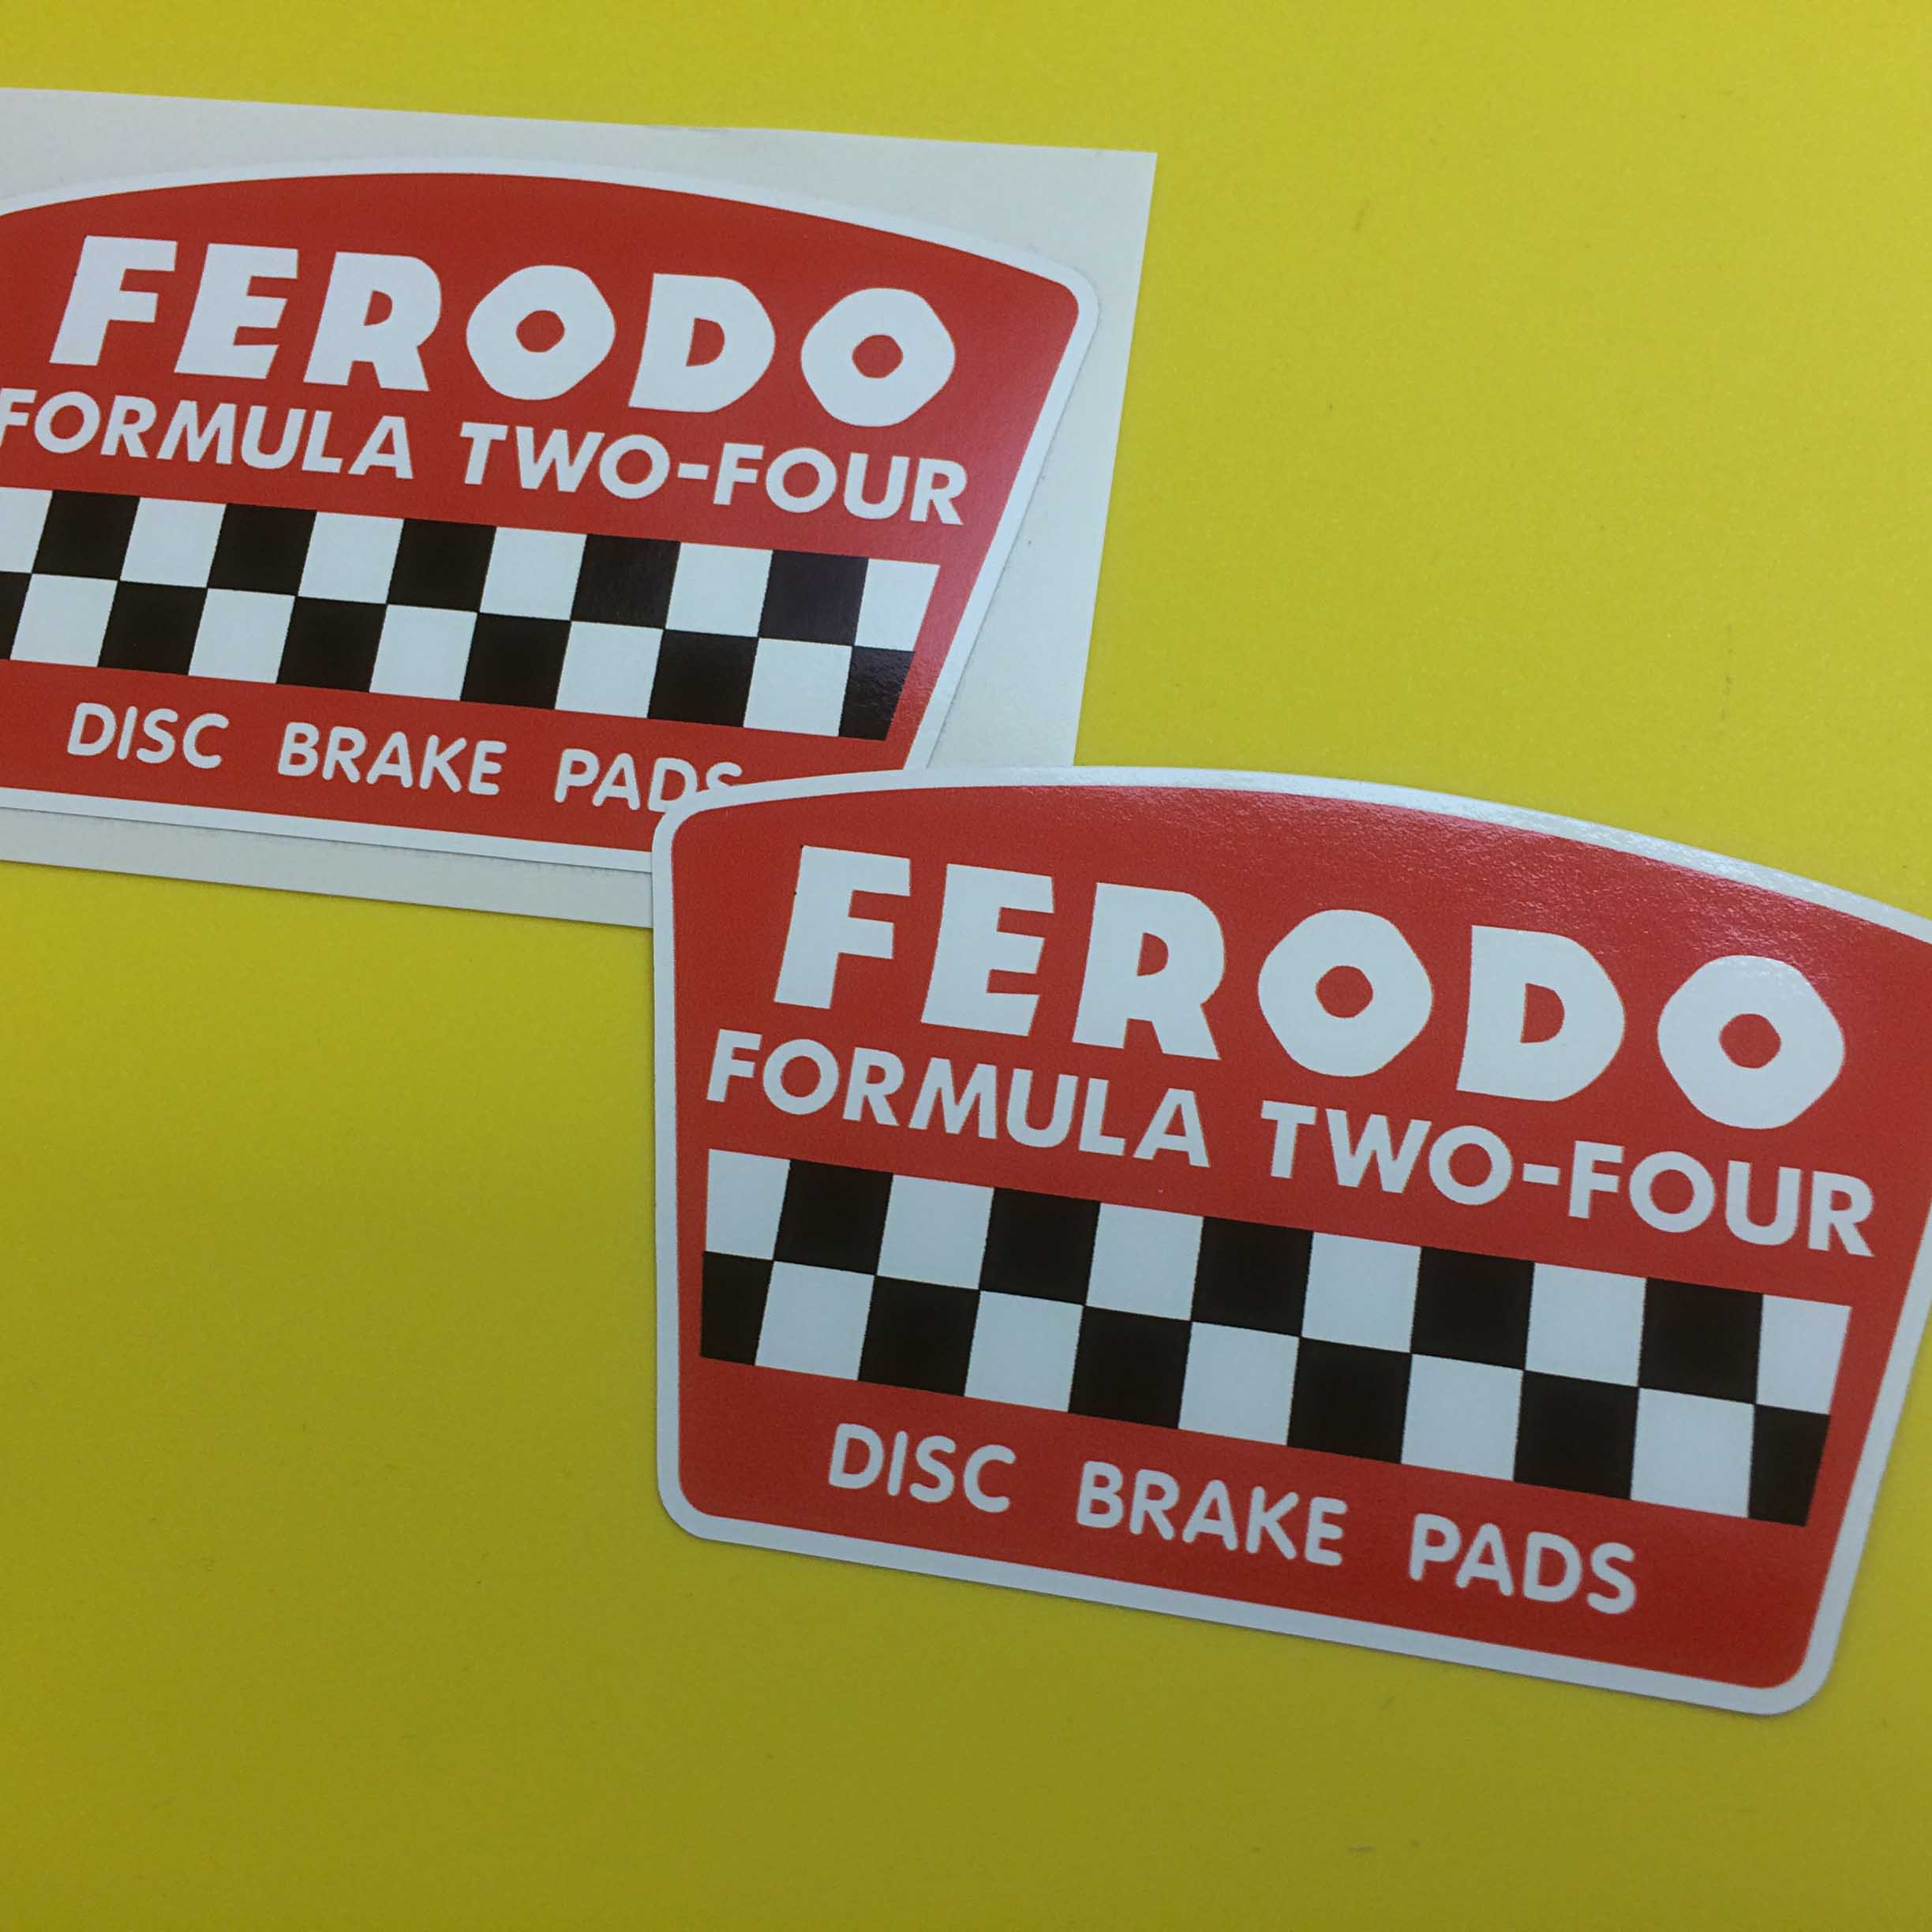 FERODO FORMULA TWO FOUR STICKERS. Ferodo Formula Two-Four Disc Brake Pads in white lettering and a strip of black and white chequer on a red sticker.